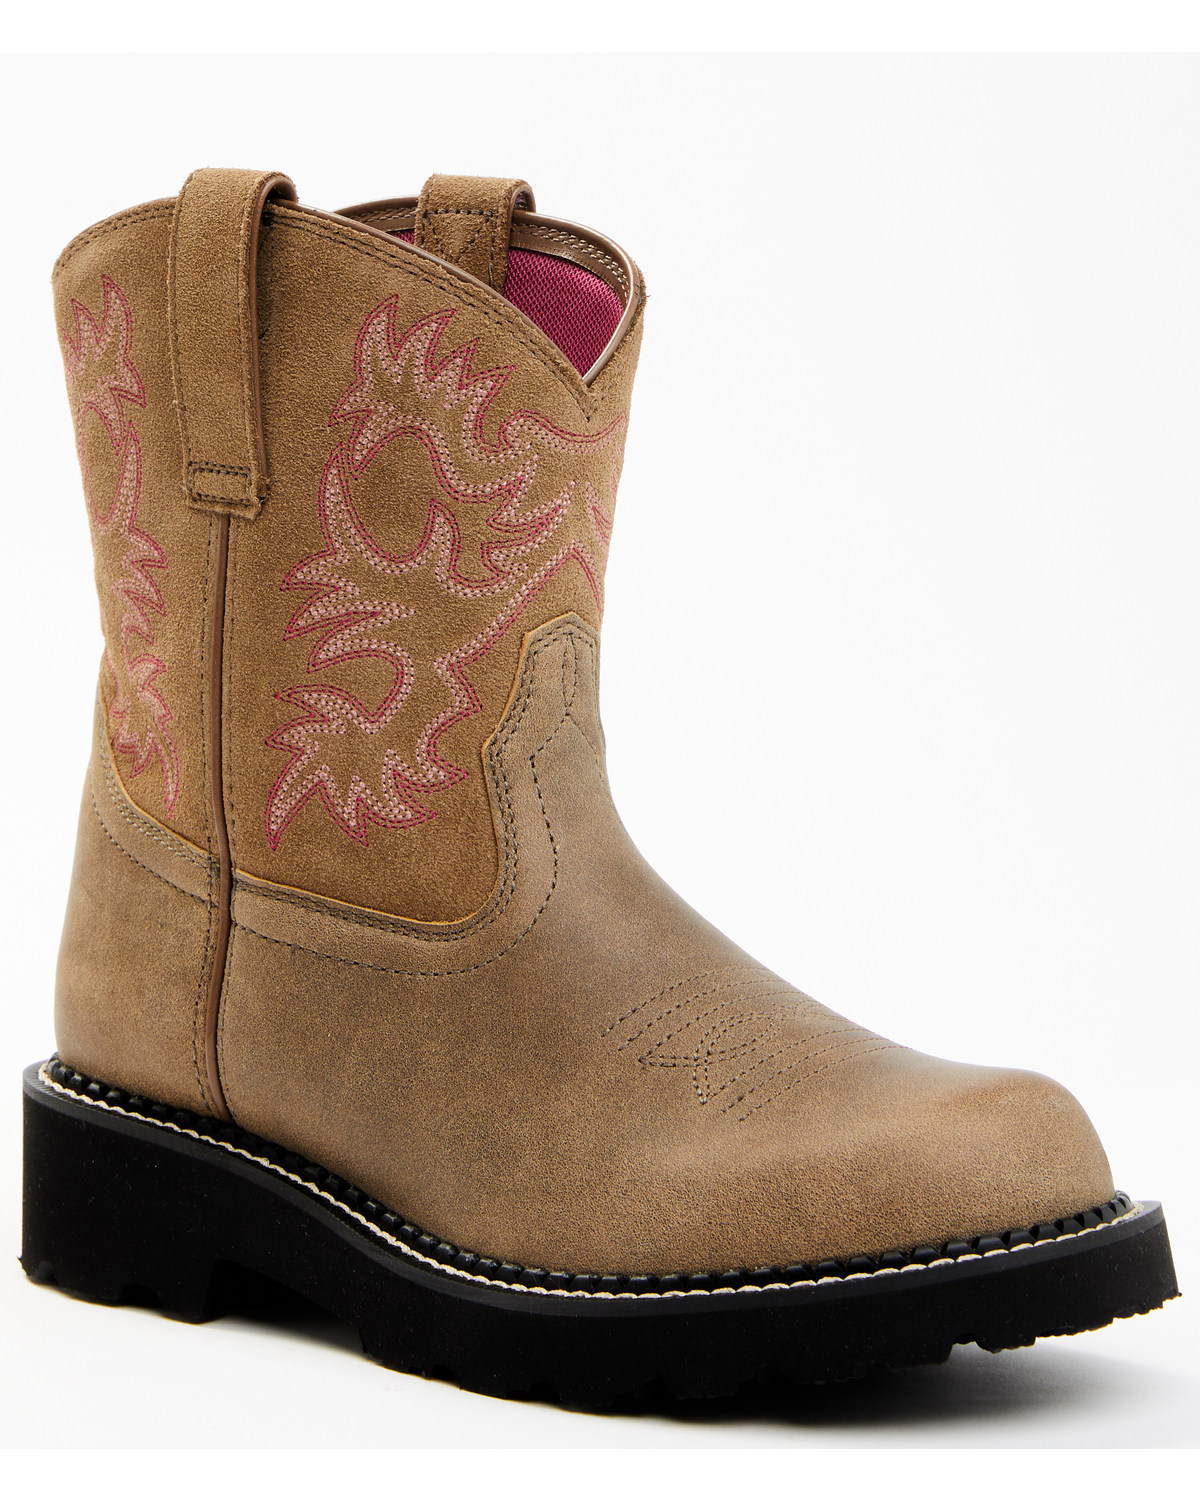 Ariat Women's Fatbaby Bomber Western Boots - Round Toe